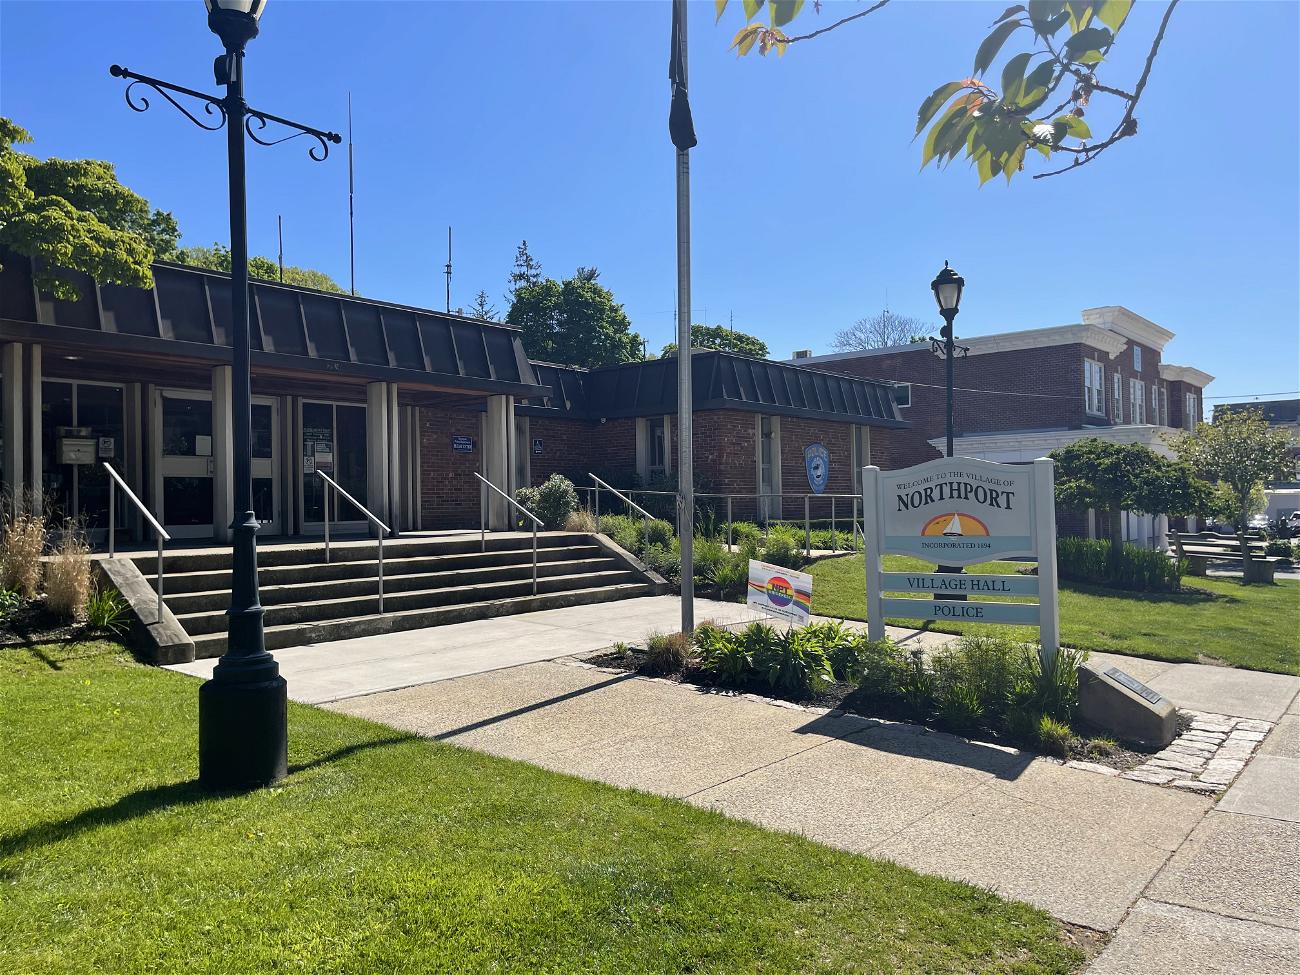 A special Board of Education meeting is scheduled for this evening, Thursday, September 21 at 7pm at the William J. Brosnan building. The meeting will include a presentation on the proposals for the district&#39;s three available properties: Bellerose Avenue, Dickinson Avenue and the William J. Brosnan building. The meeting can be streamed via Zoom: https://zoom.us/j/95771726181